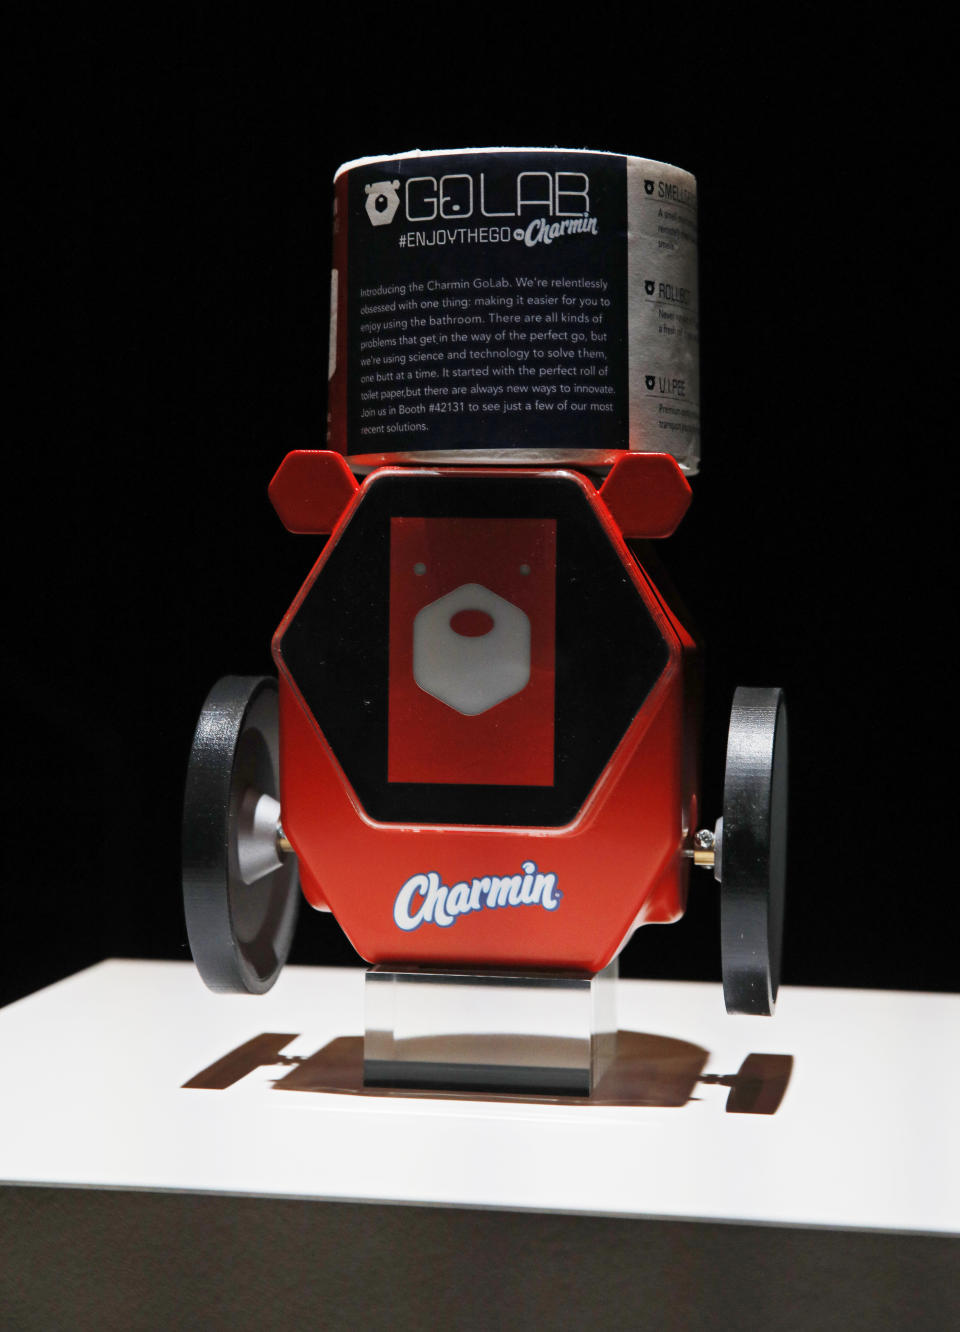 The Charmin RollBot is on display during a Procter & Gamble news conference before CES International, Sunday, Jan. 5, 2020, in Las Vegas. (AP Photo/John Locher)